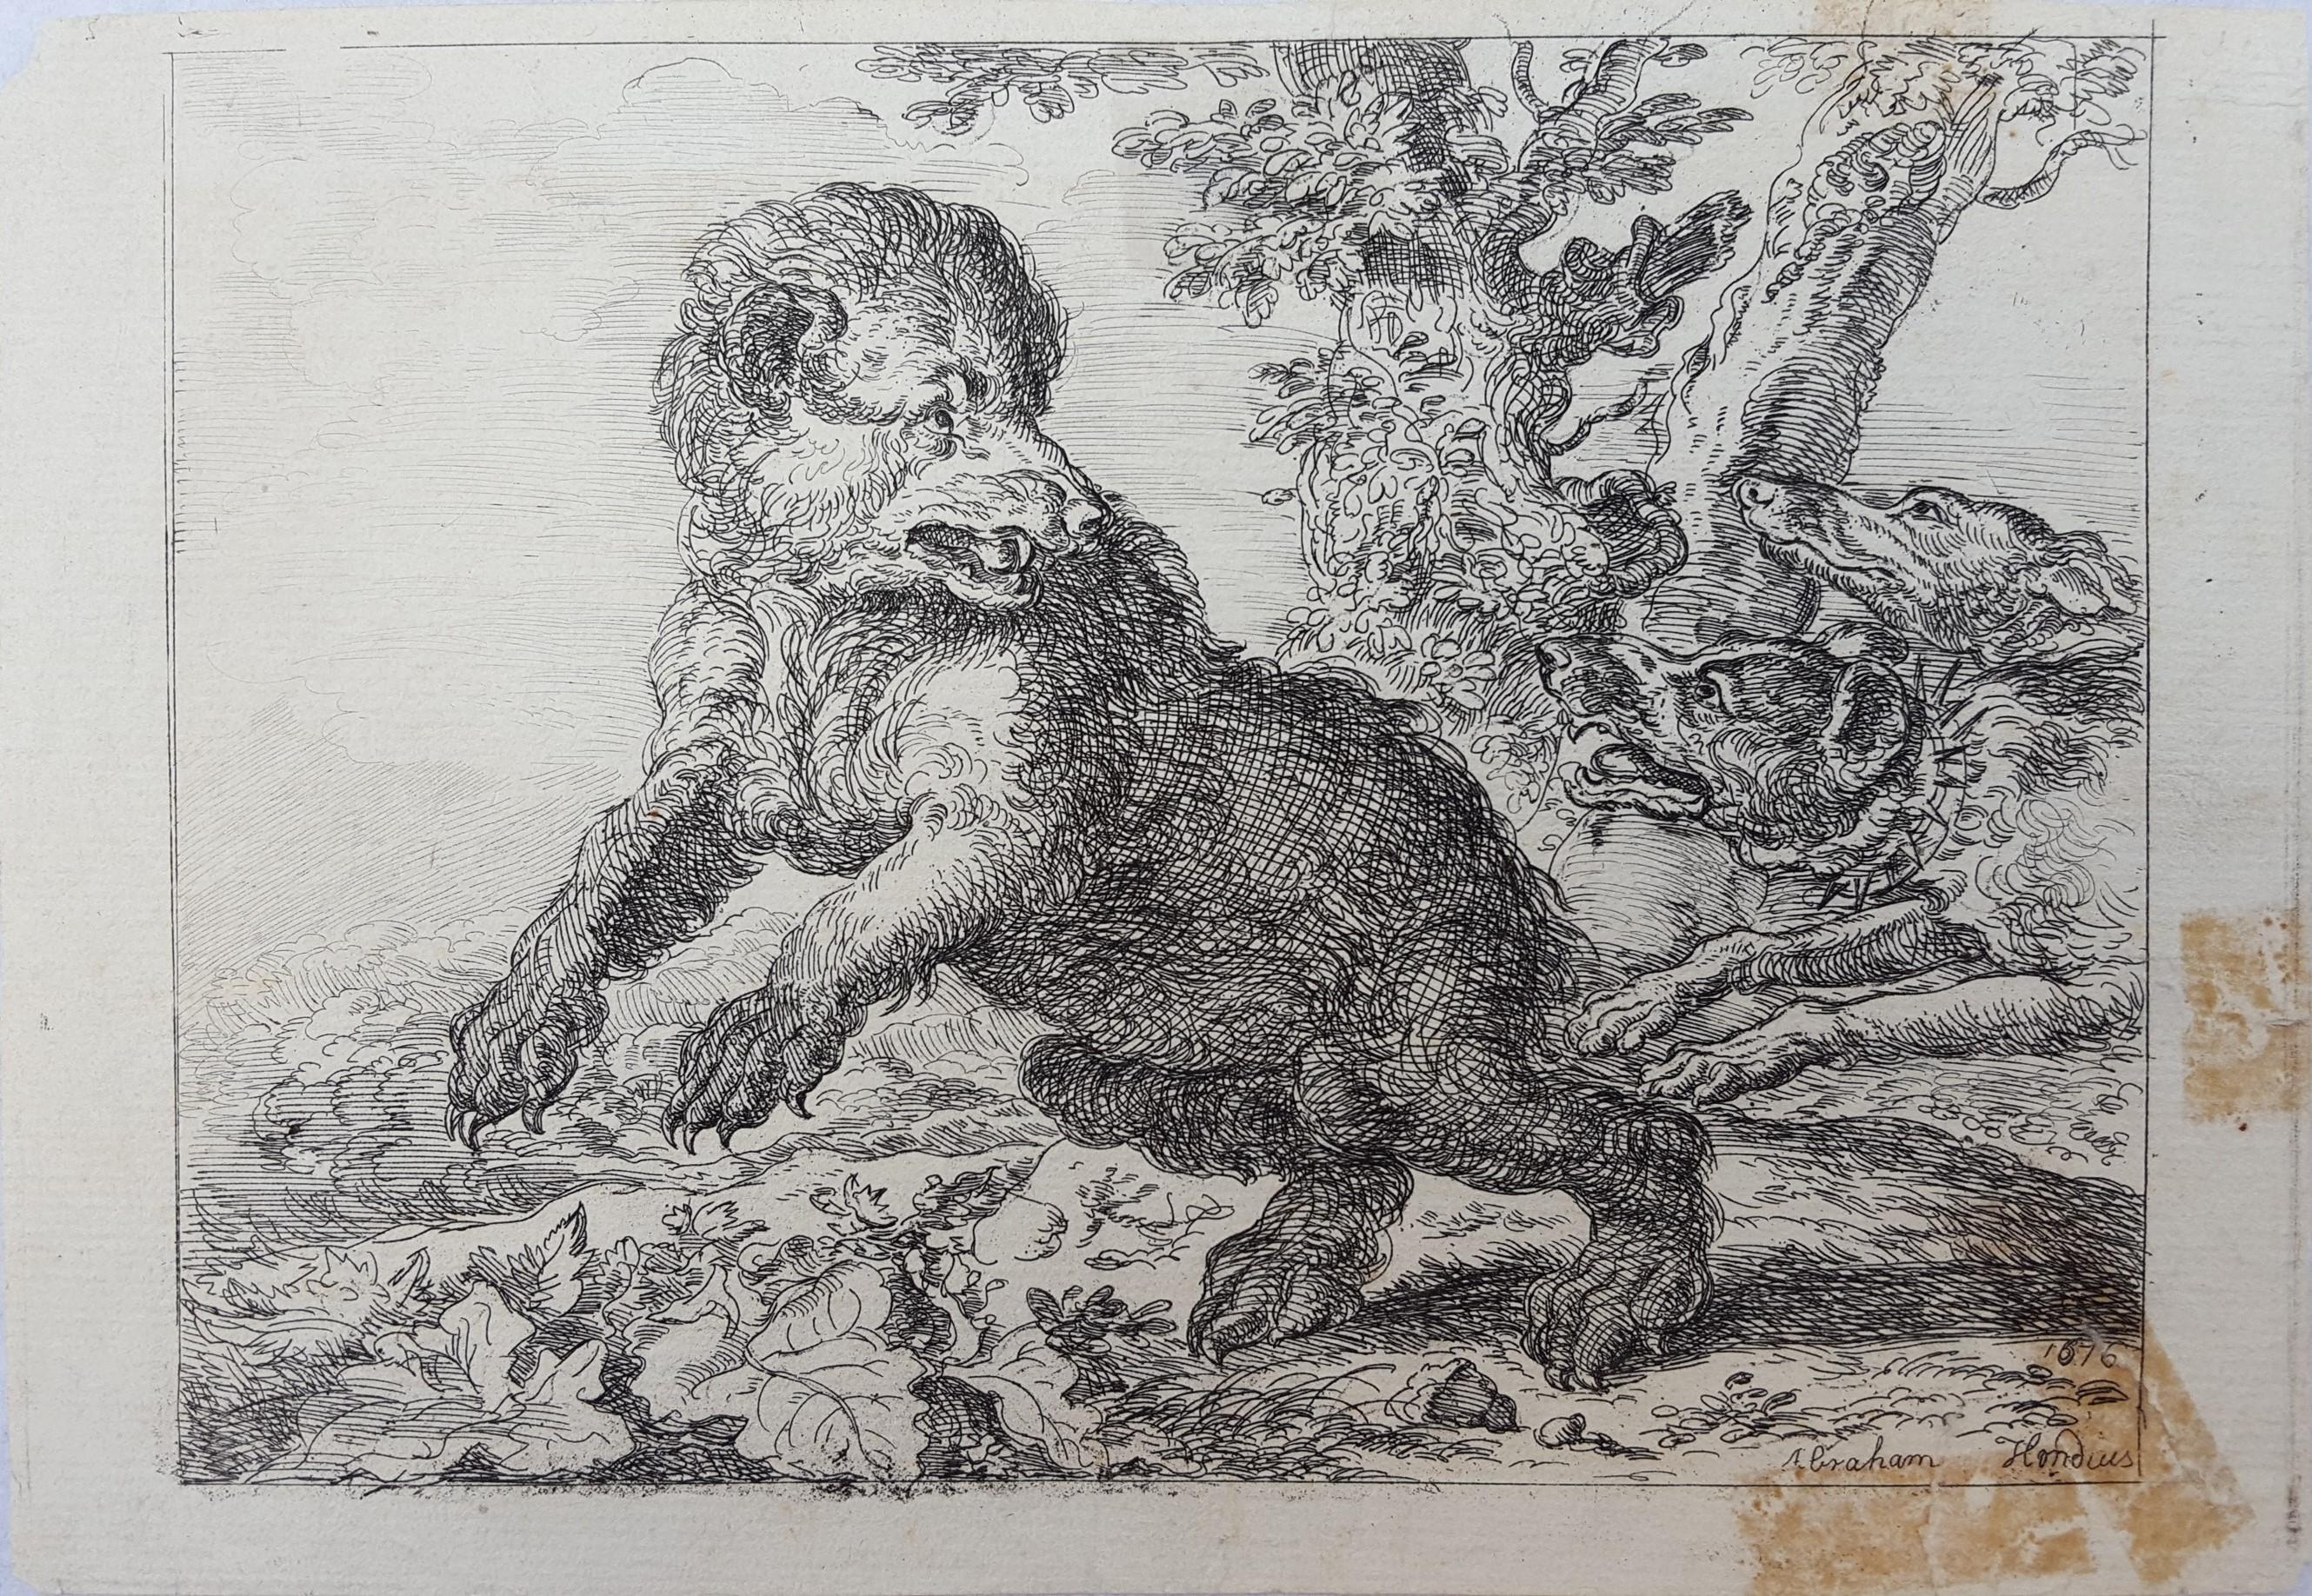 Honden Jagen Op Een Beer (Hounds Hunting a Bear) /// Old Masters Dogs Landscape - Print by Abraham Hondius